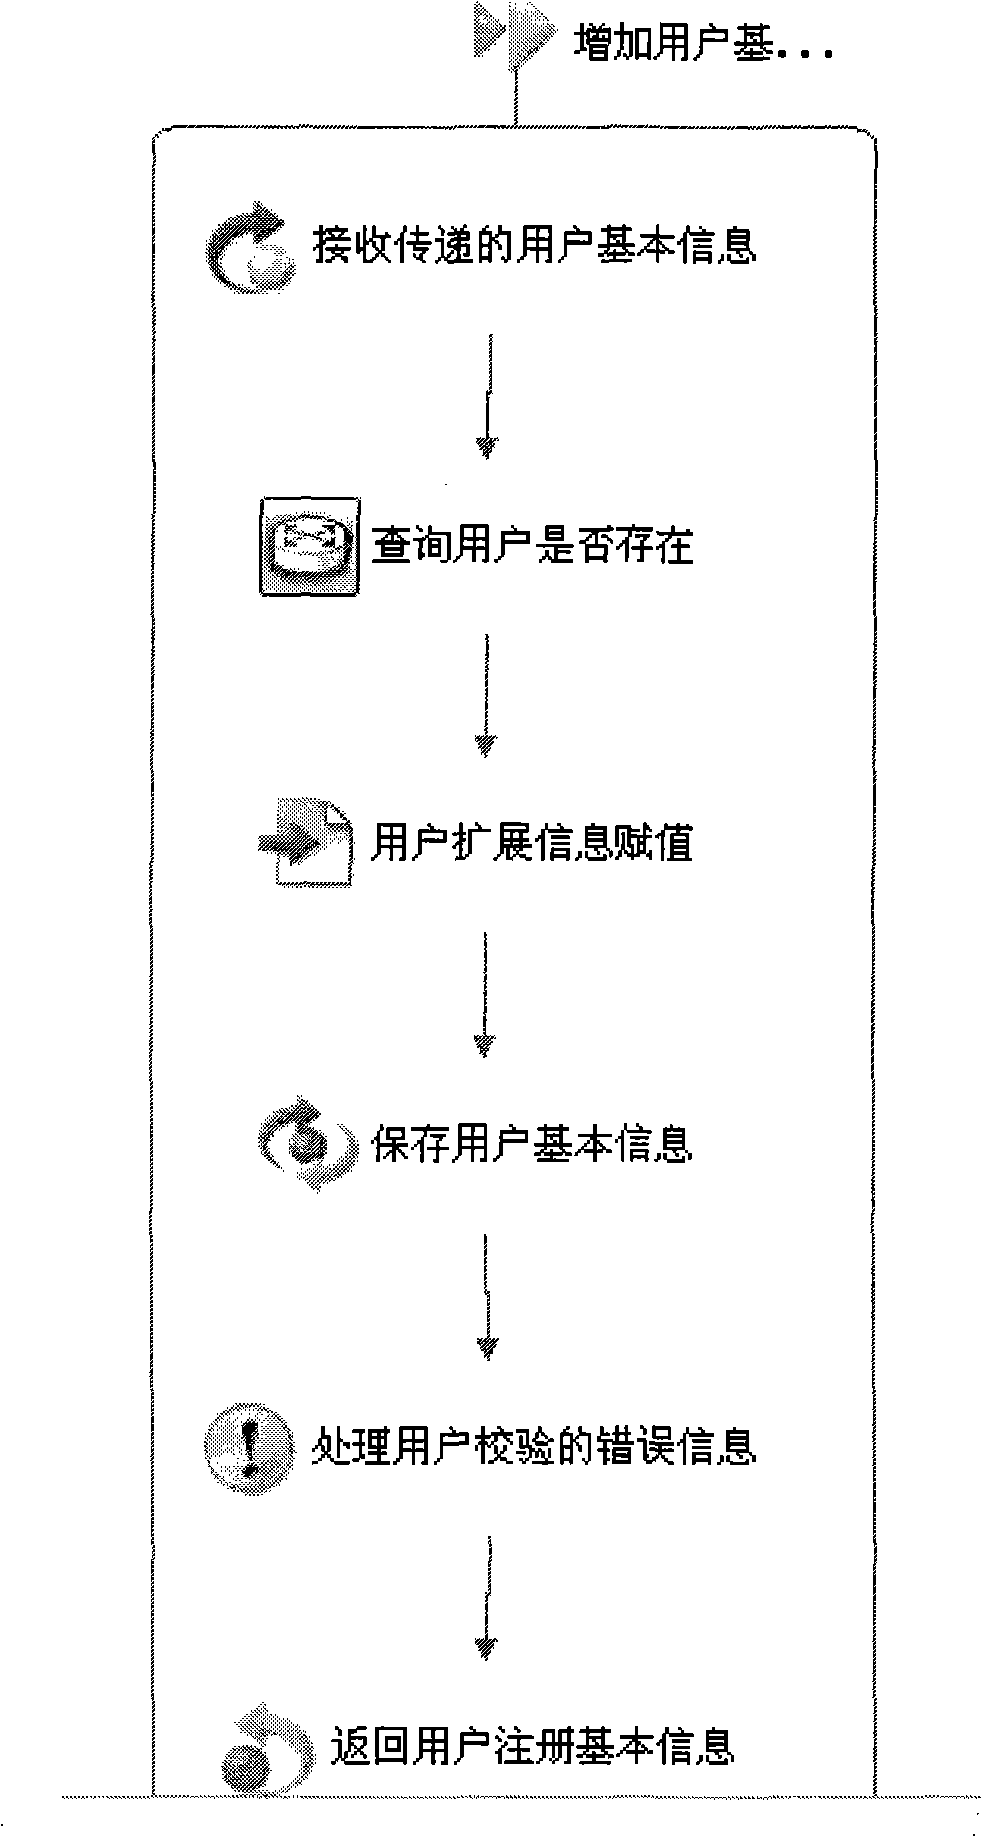 Software development method and system for executing model drive structure